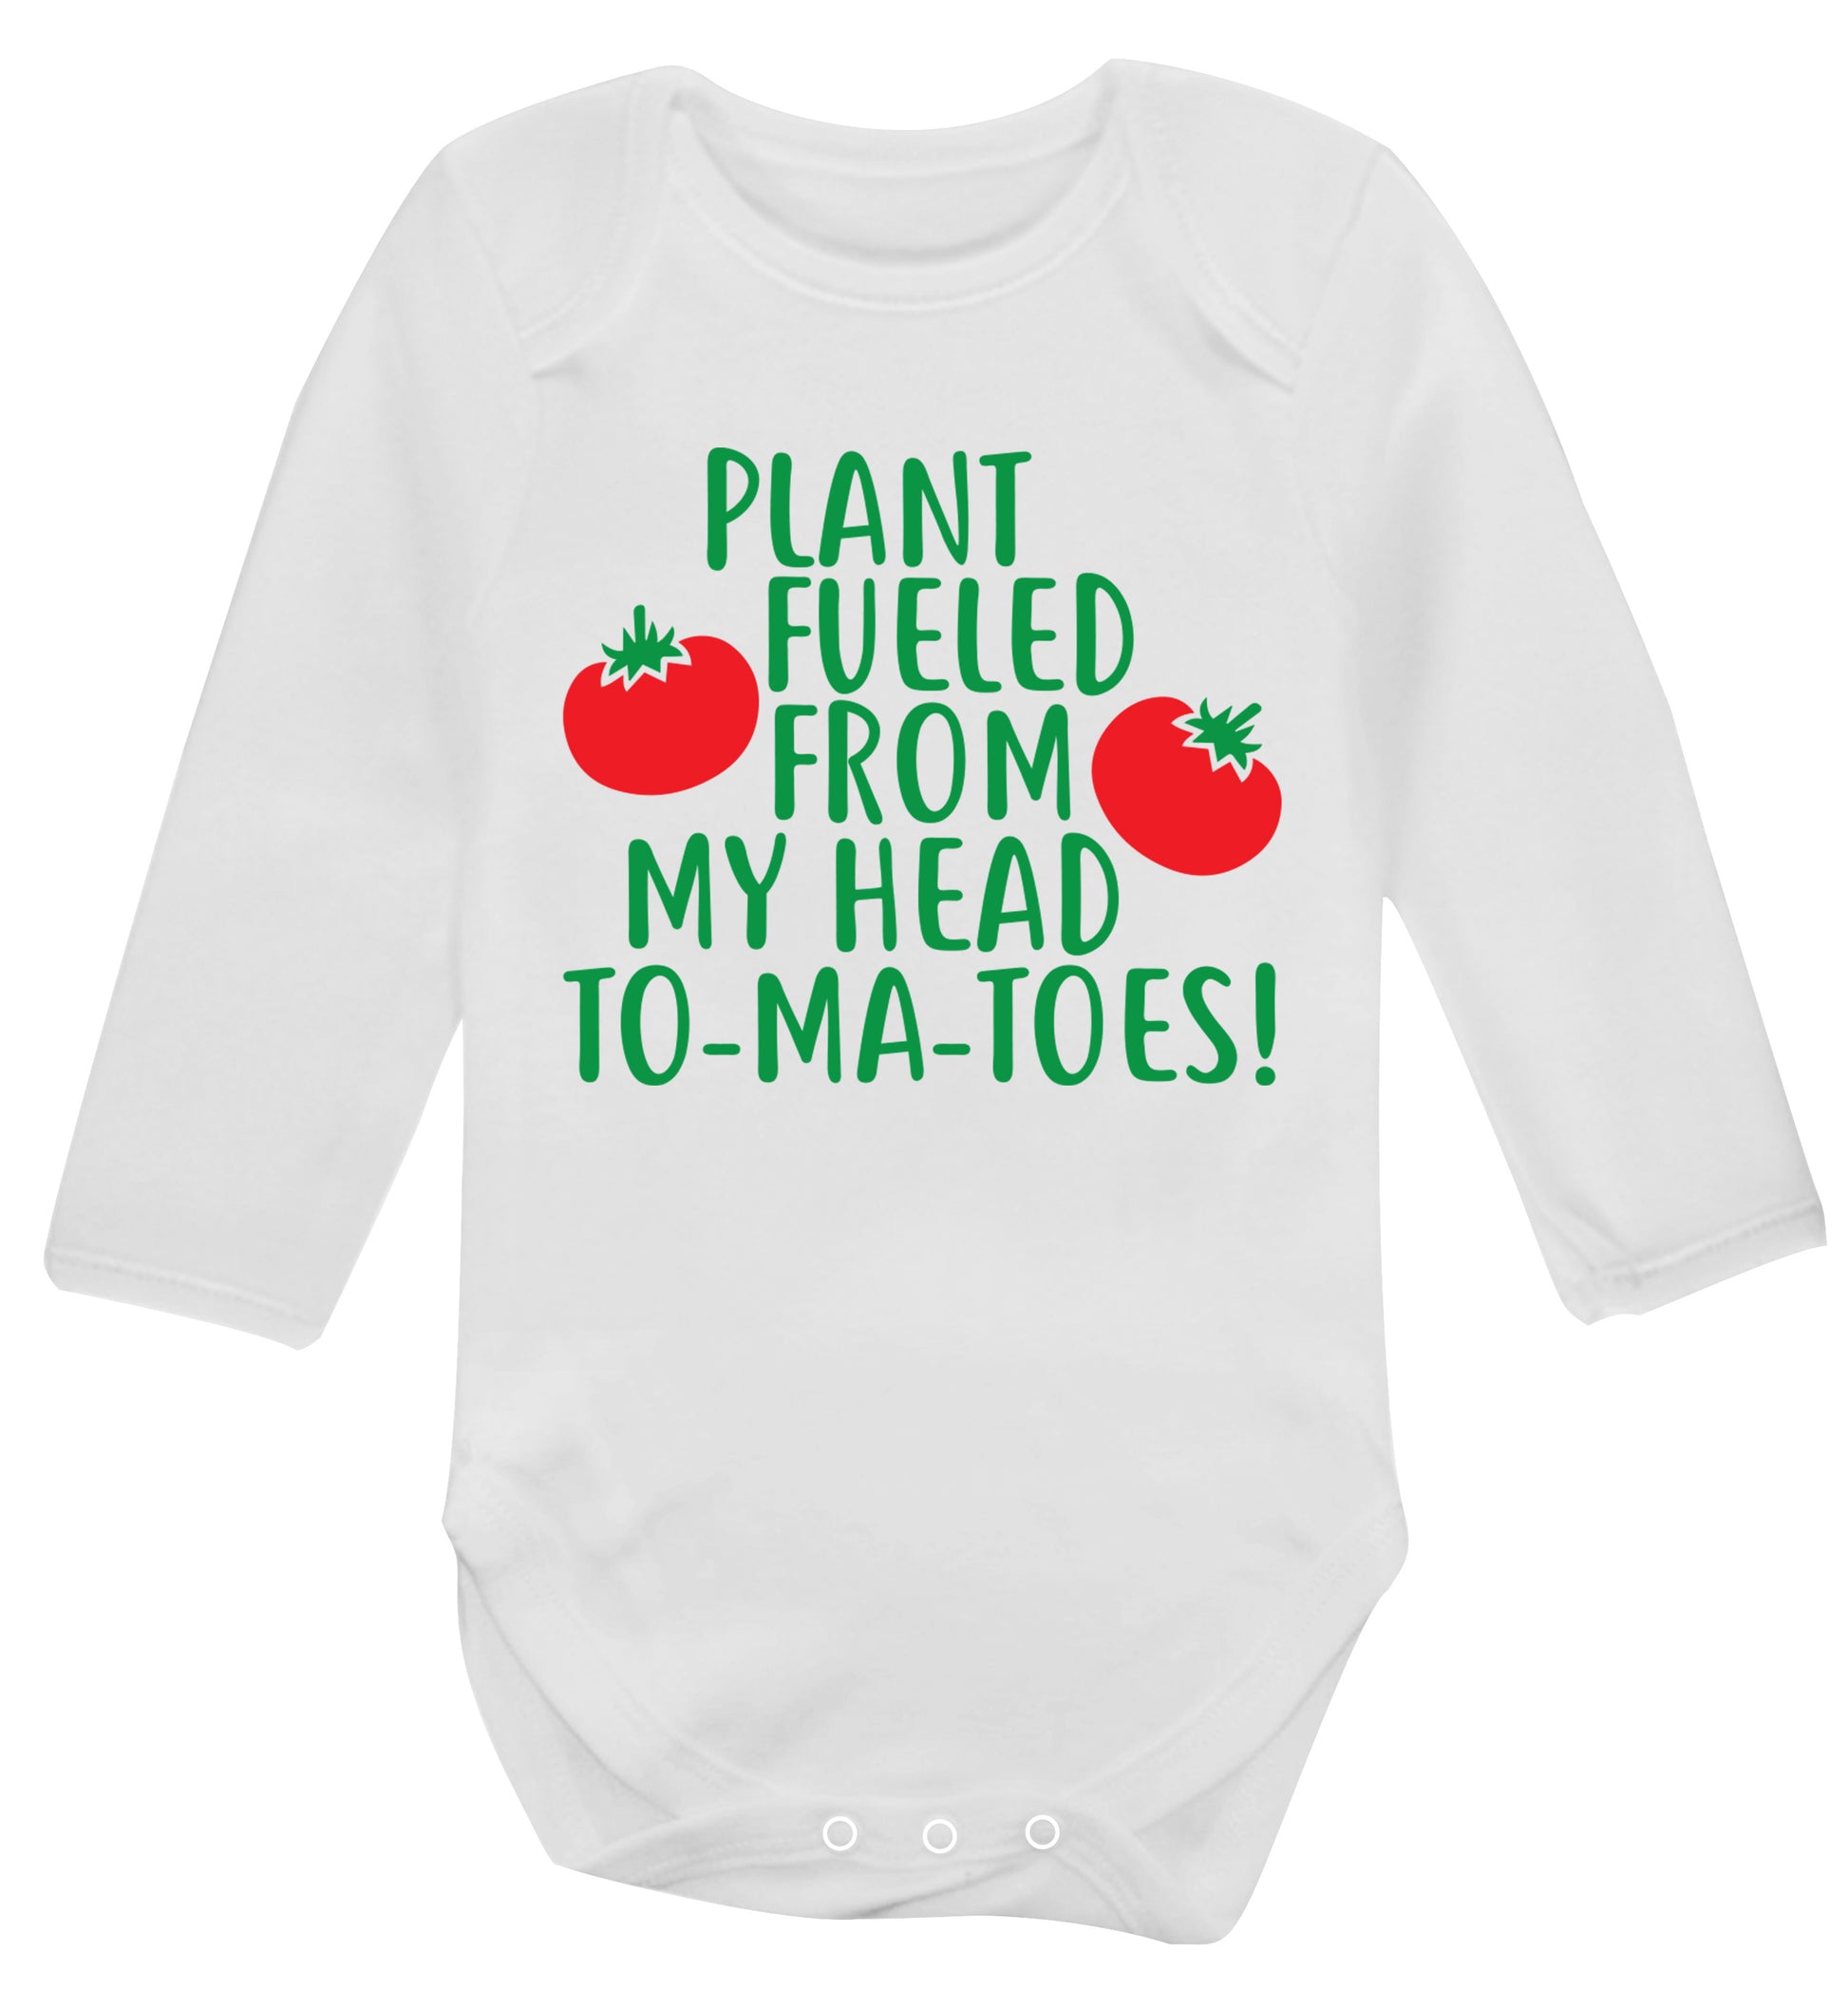 Plant fueled from my head to-ma-toes Baby Vest long sleeved white 6-12 months